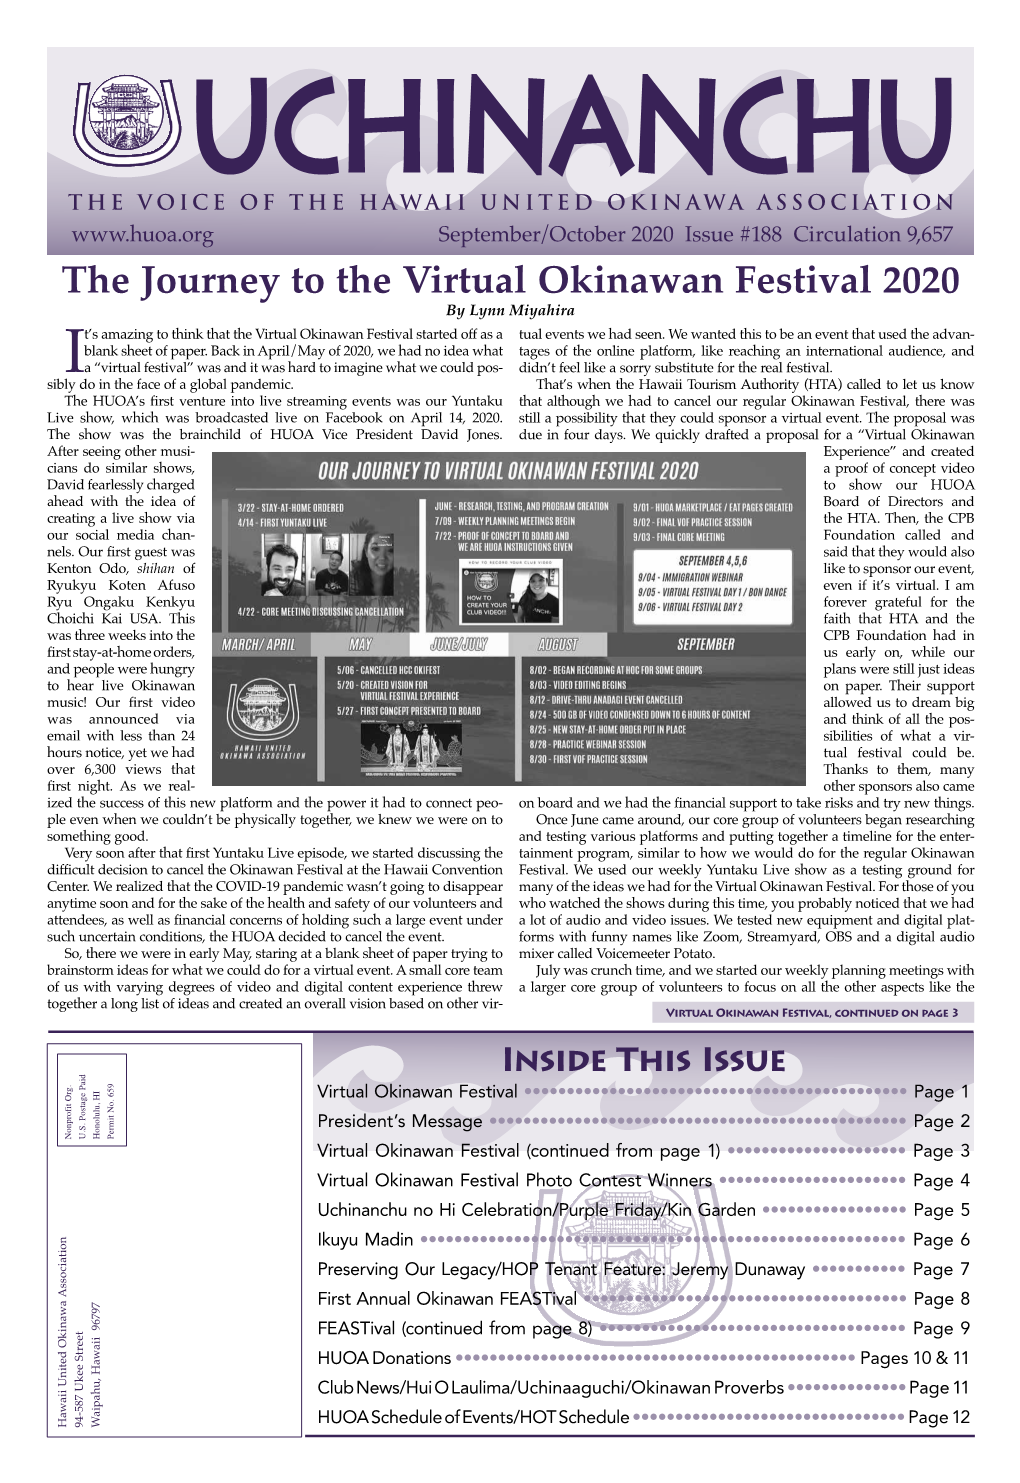 The Journey to the Virtual Okinawan Festival 2020